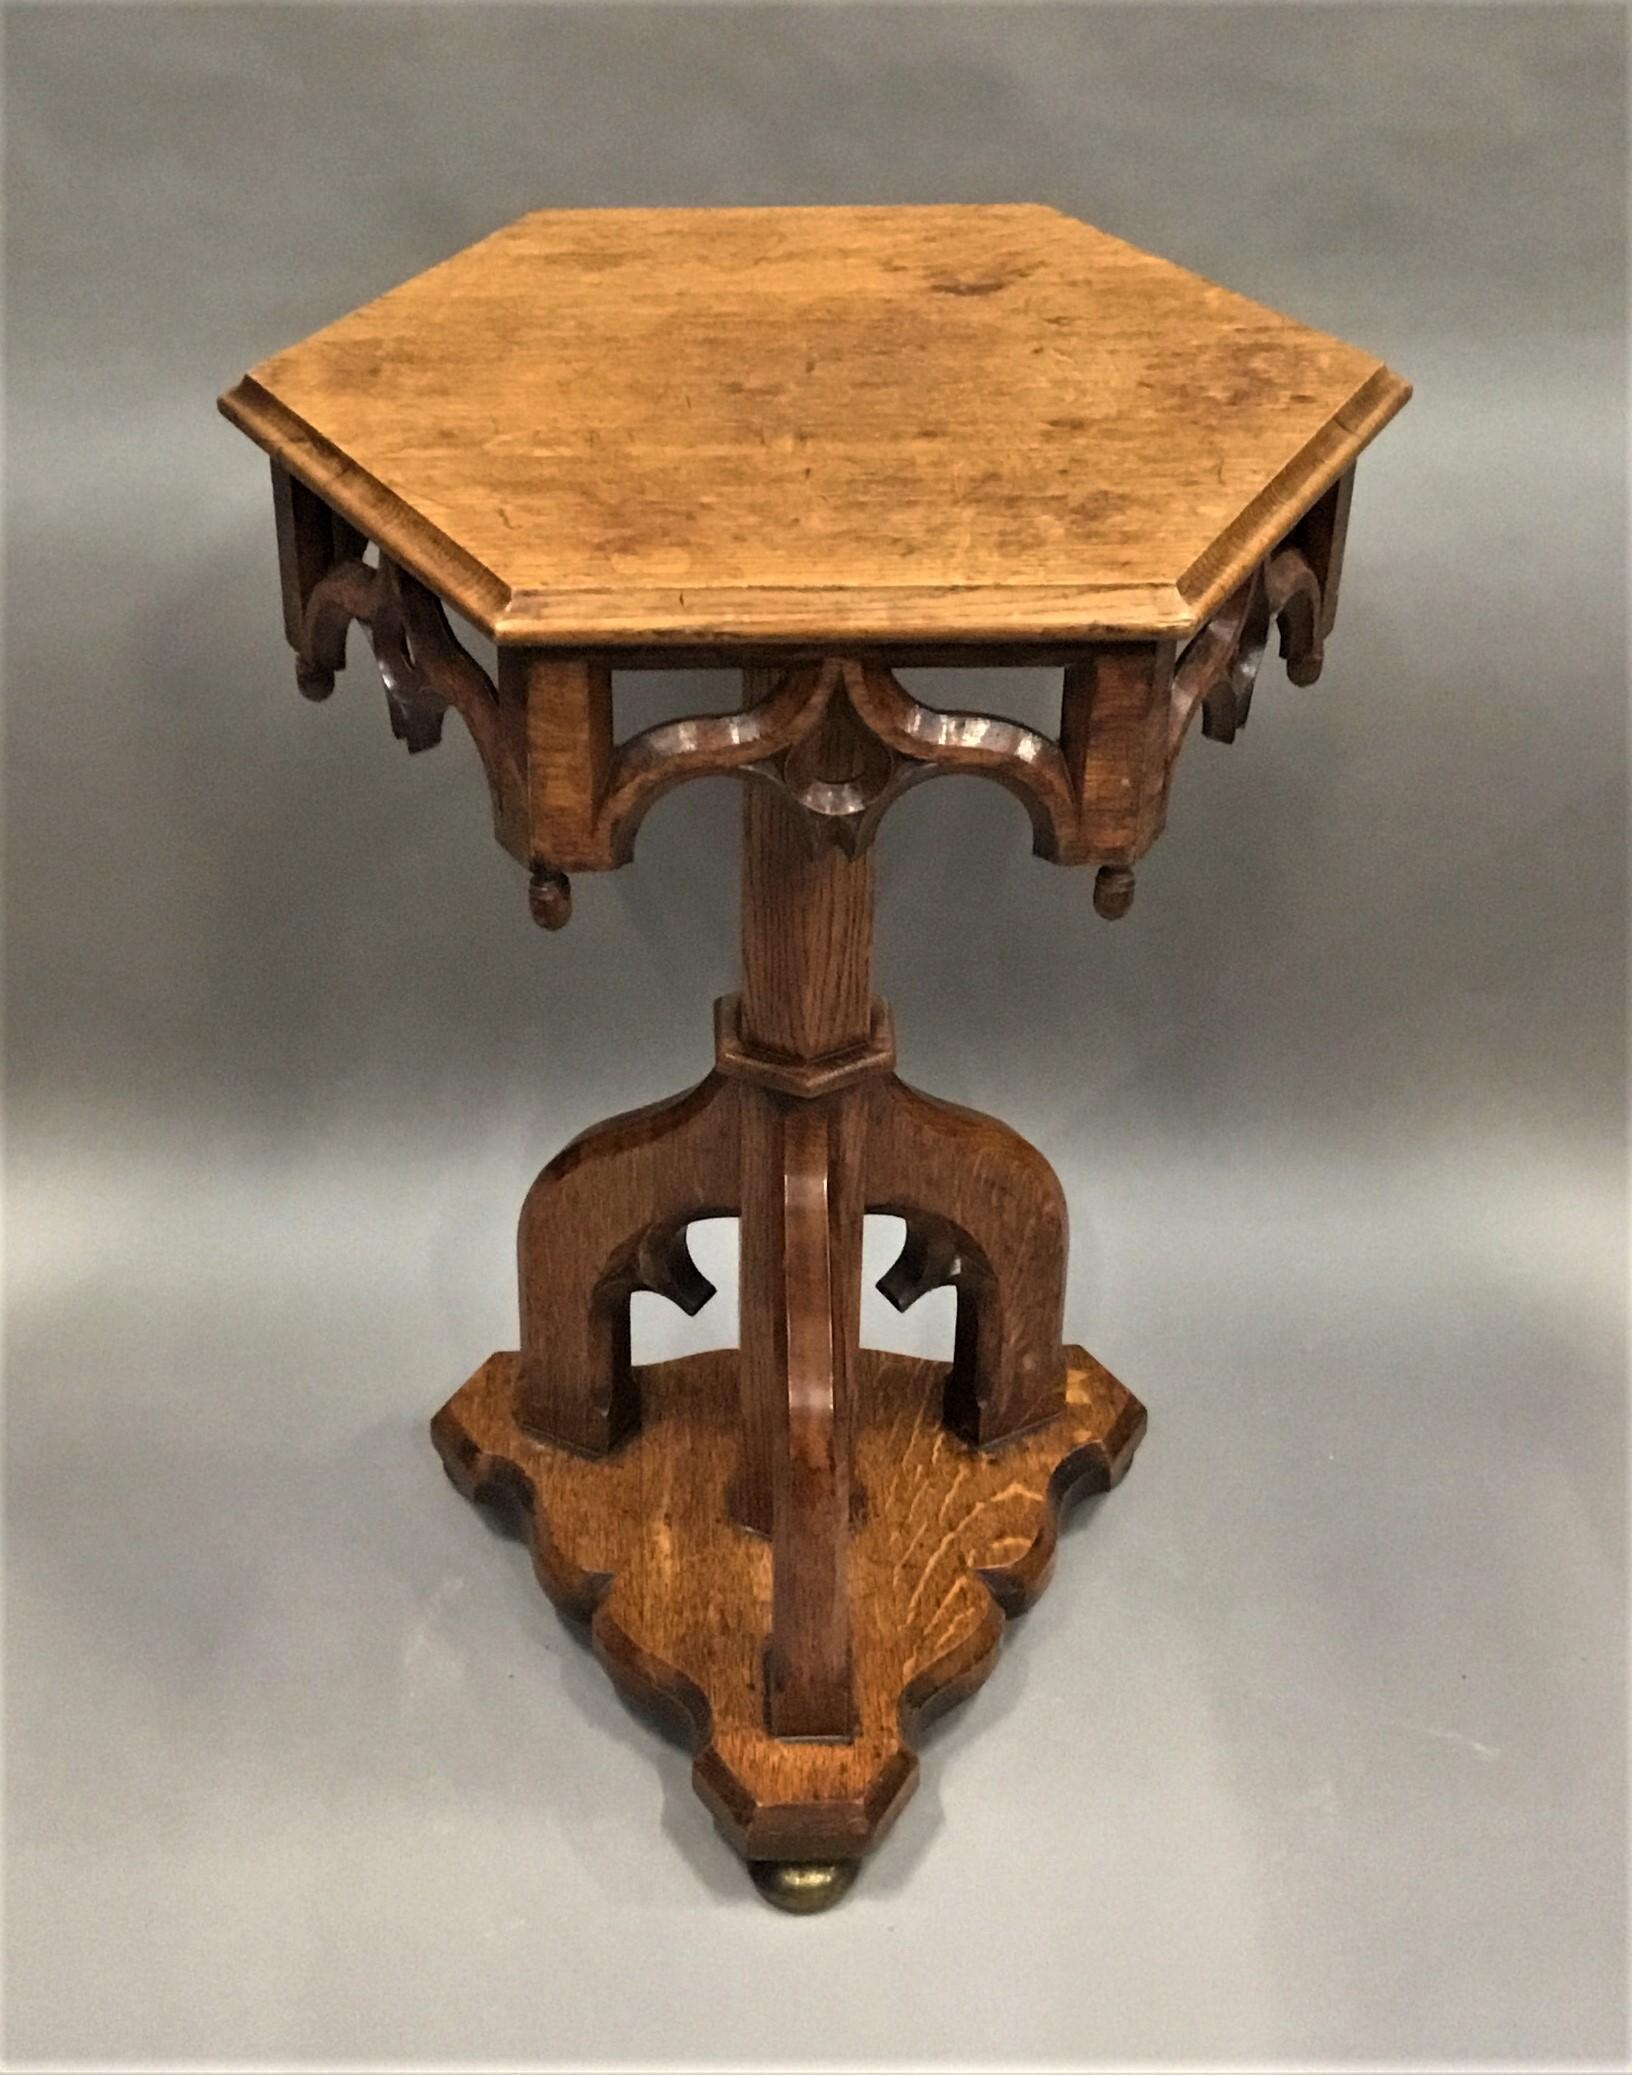 Good unusual 19th century Gothic oak occasional table, the hexagonal top with an ogee moulded edge above the pierced Gothic arch frieze with acorn finials to the corners. The triform base with a hexagonal column on three Gothic arch supports raised